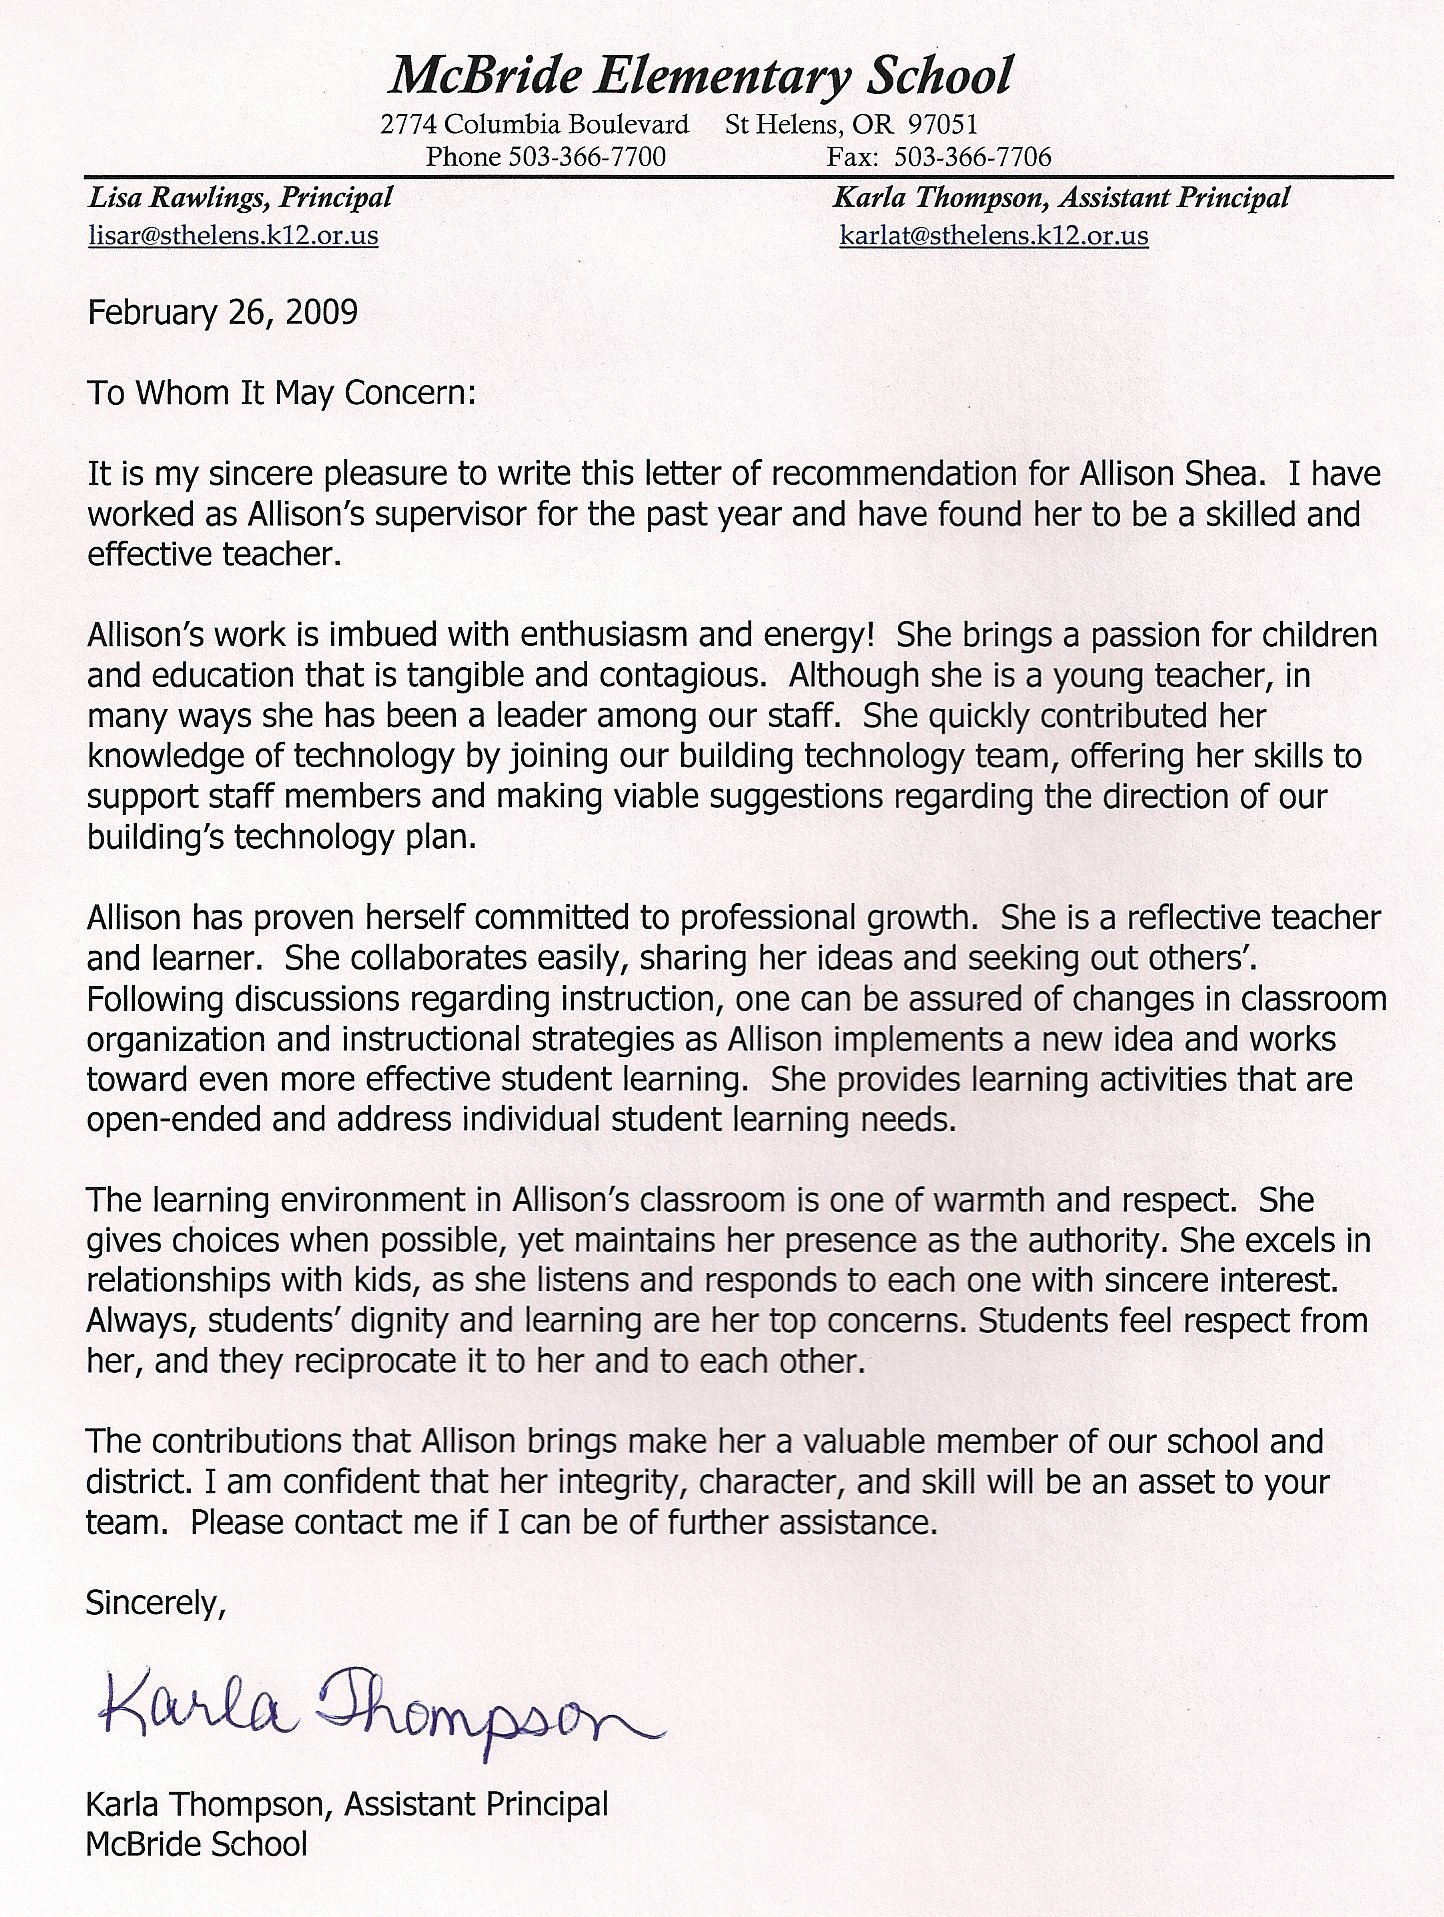 Letter Of Recommendation for Principal Best Of Resume and Re Mendations